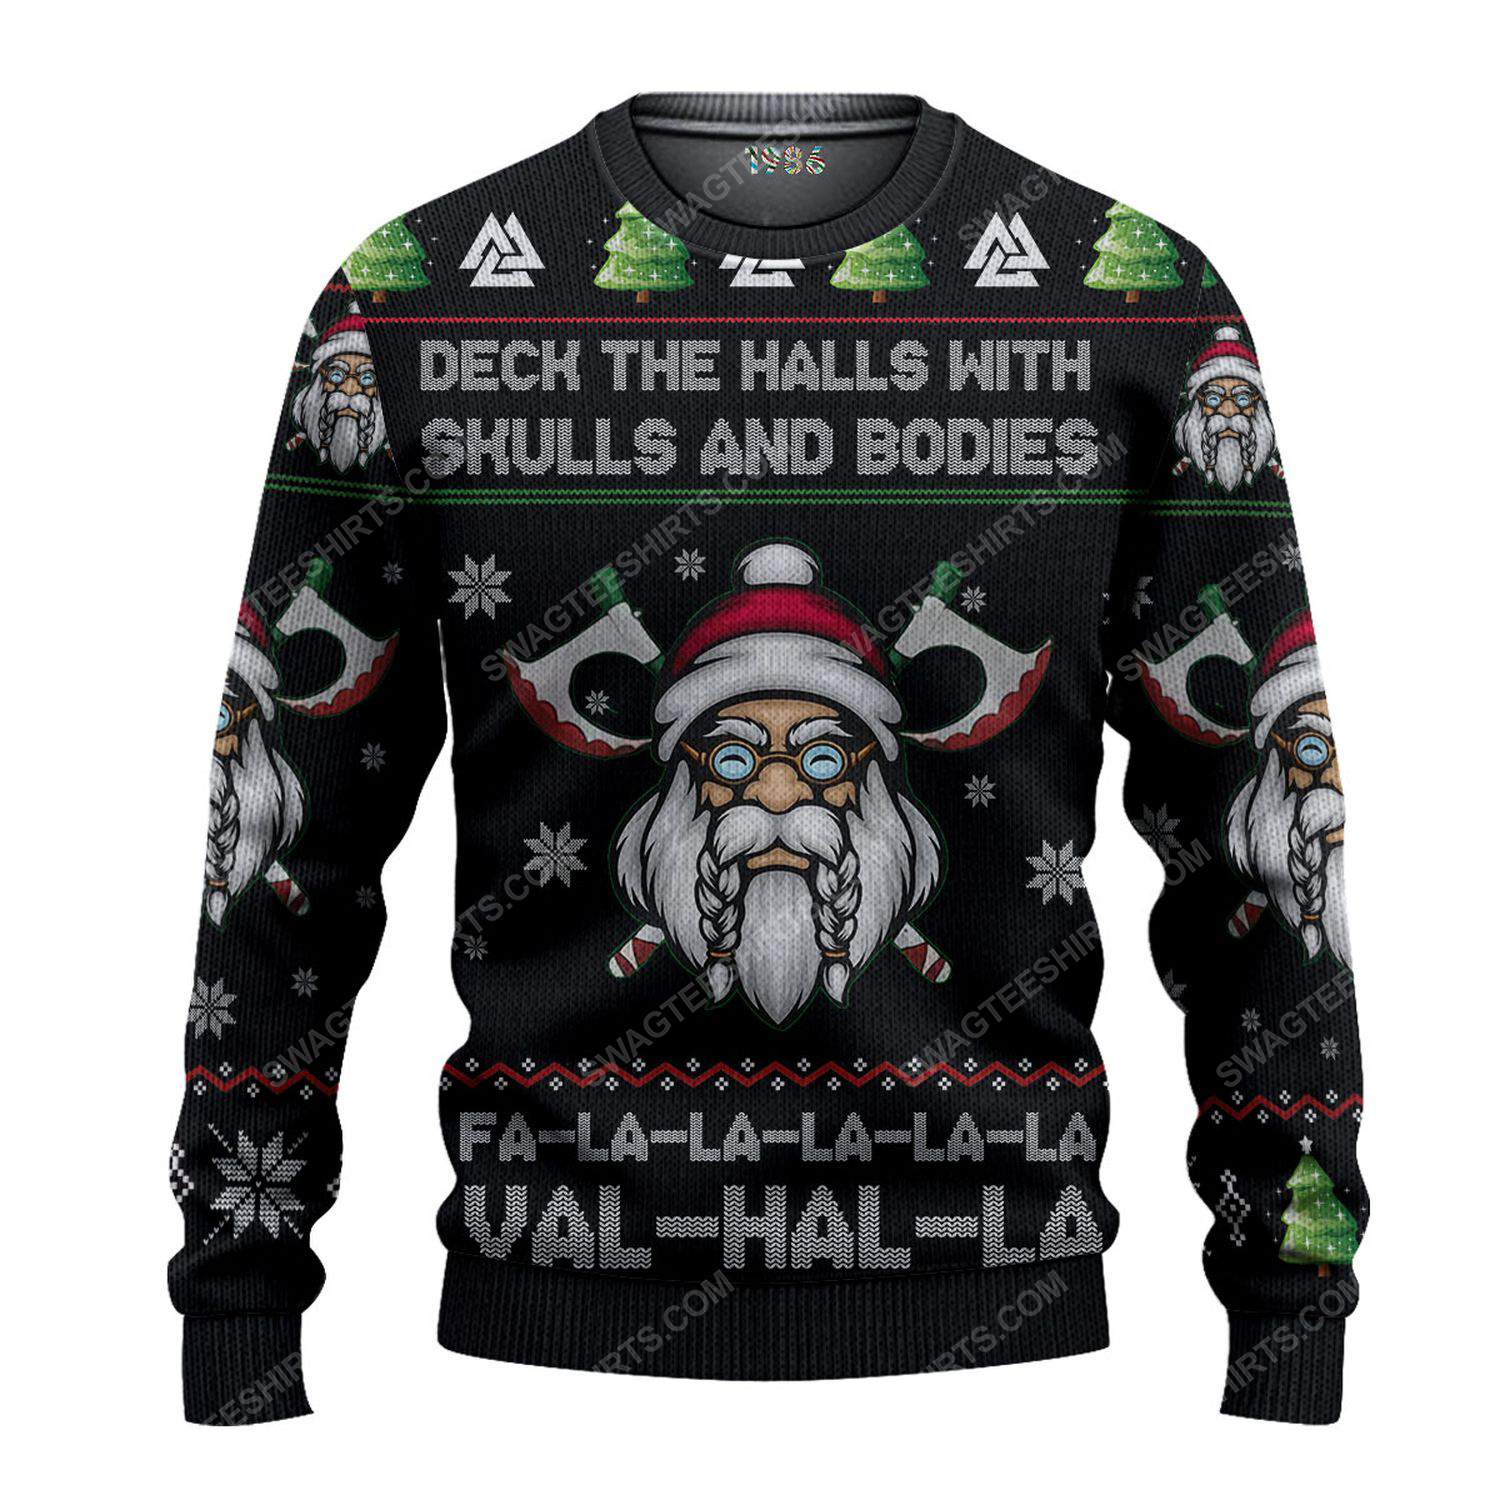 Deck the halls with skulls and bodies viking ugly christmas sweater 1 - Copy (3)